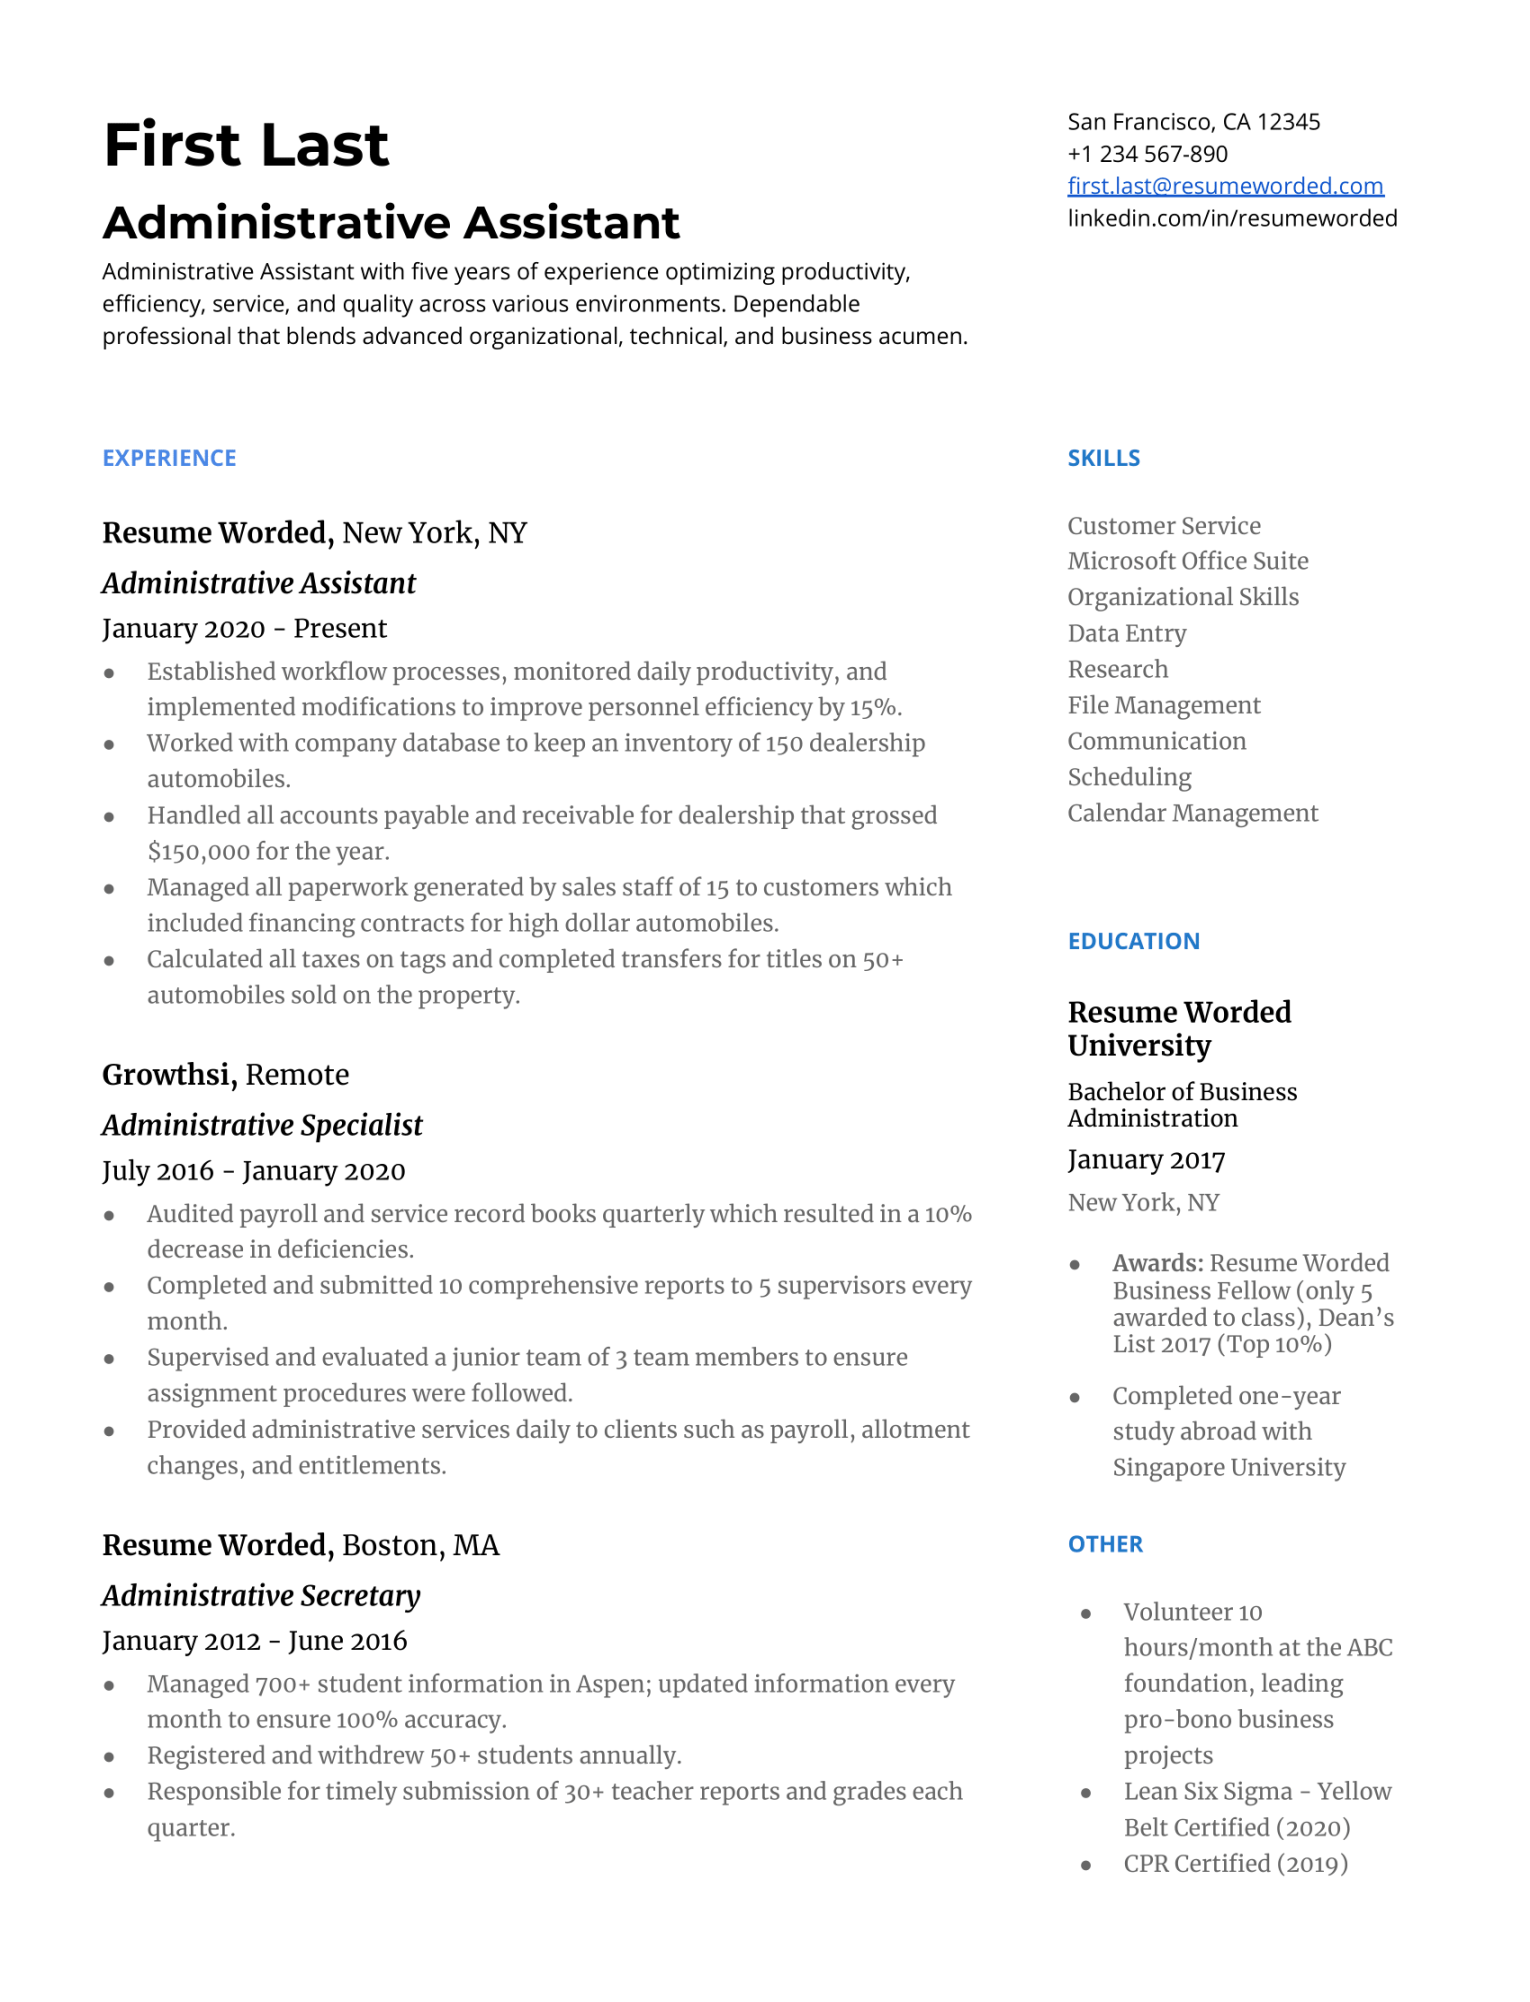 Administrative Assistant Resume Examples for   Resume Worded